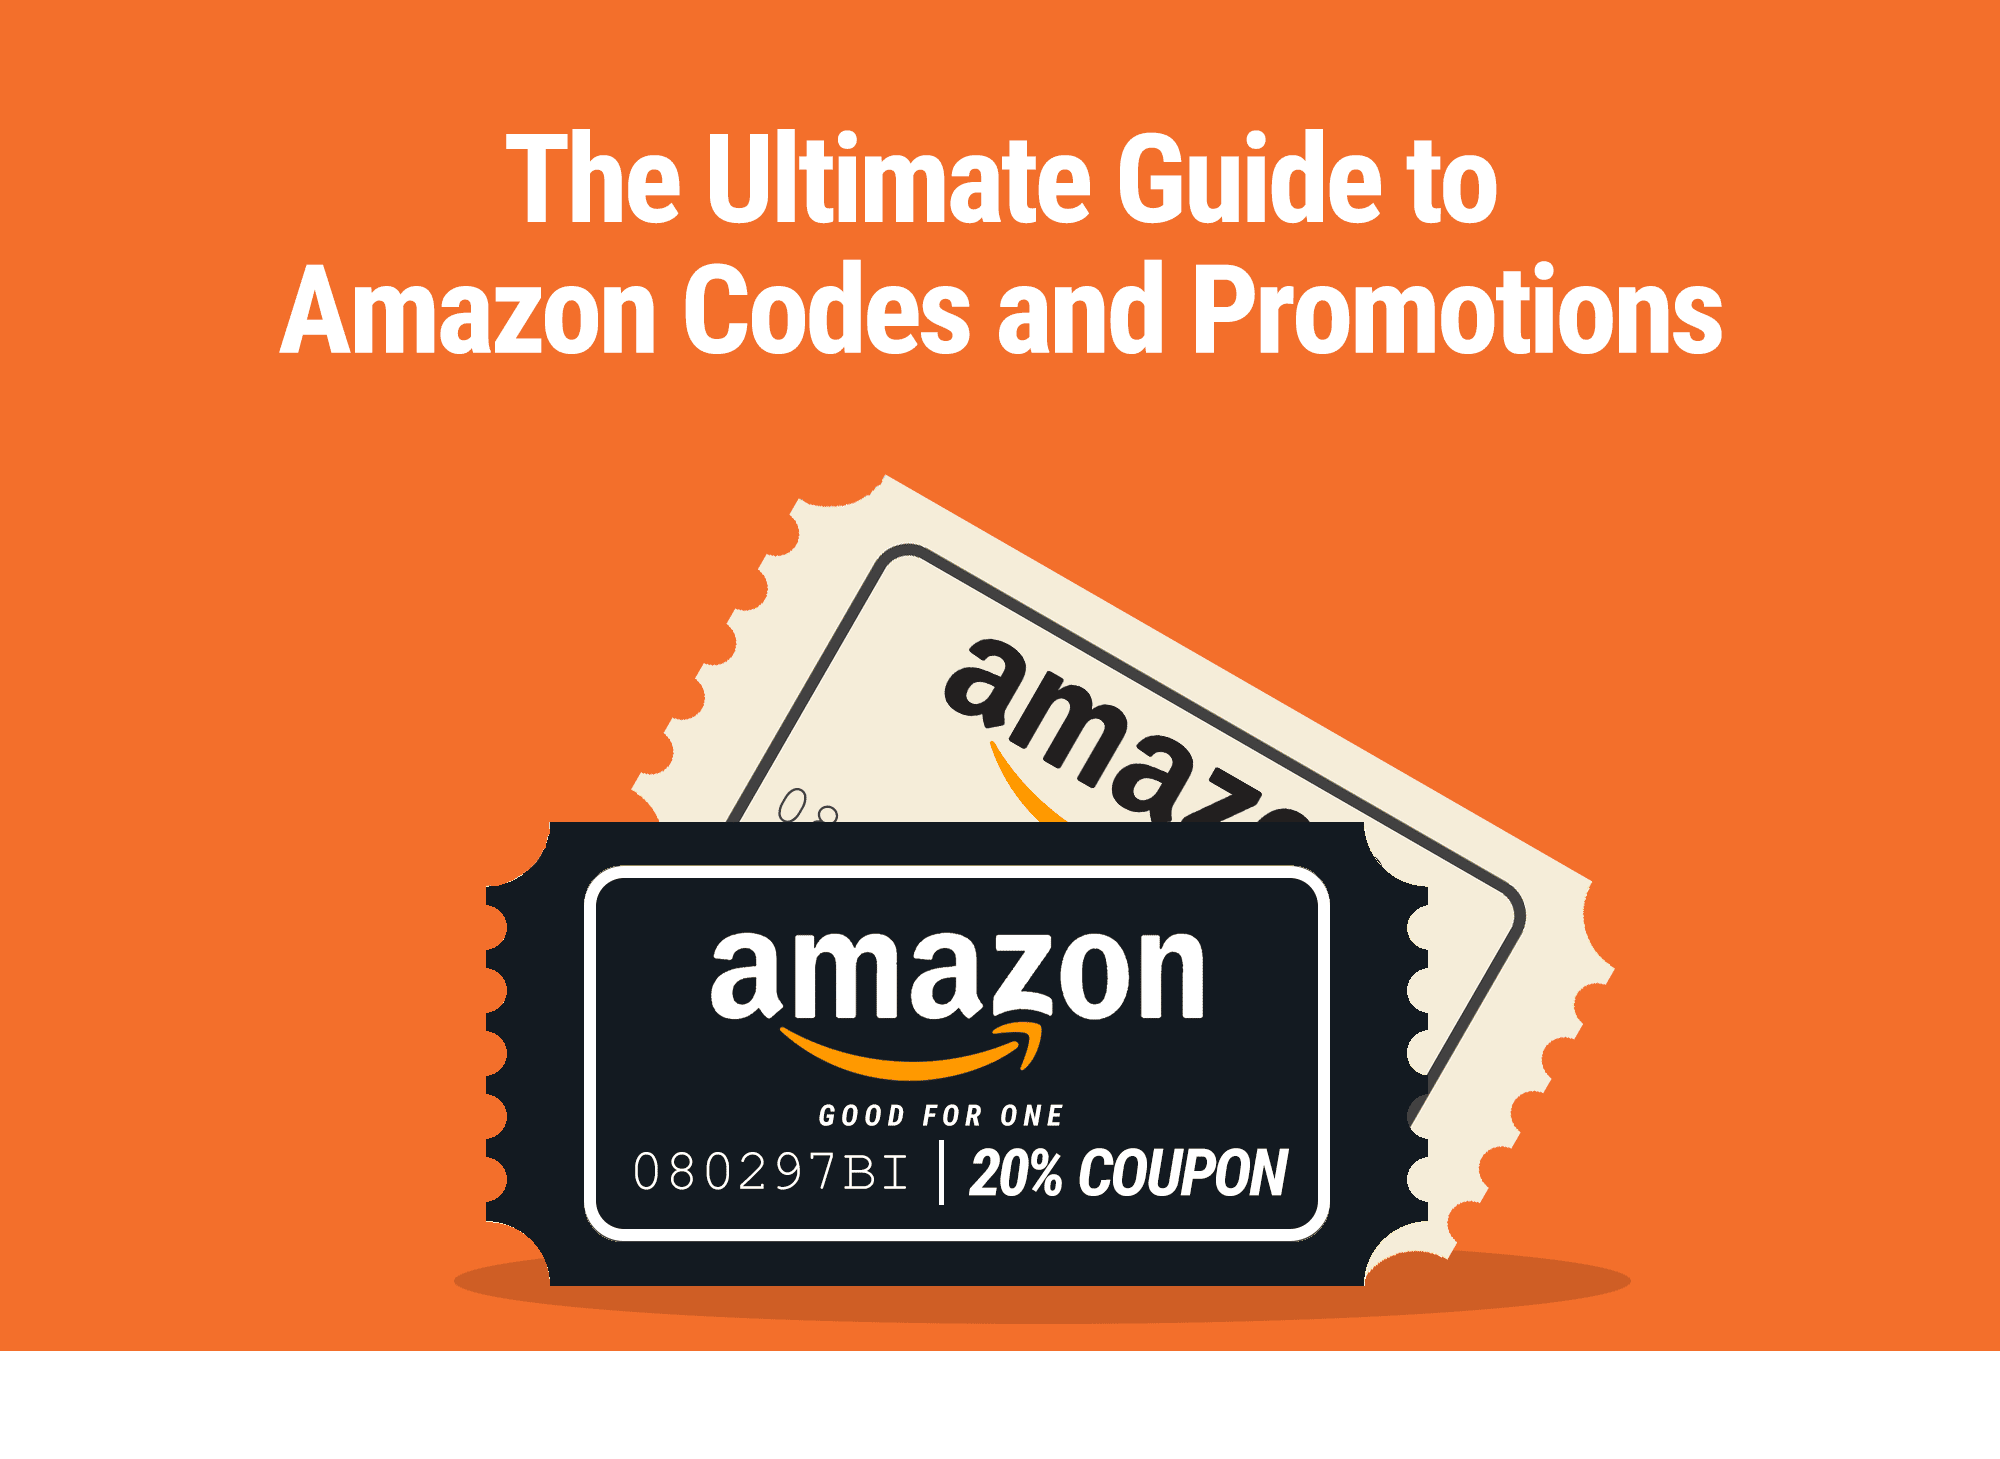 Reviews and Giveaways 2023 Guide - 8 Ways To Max Results